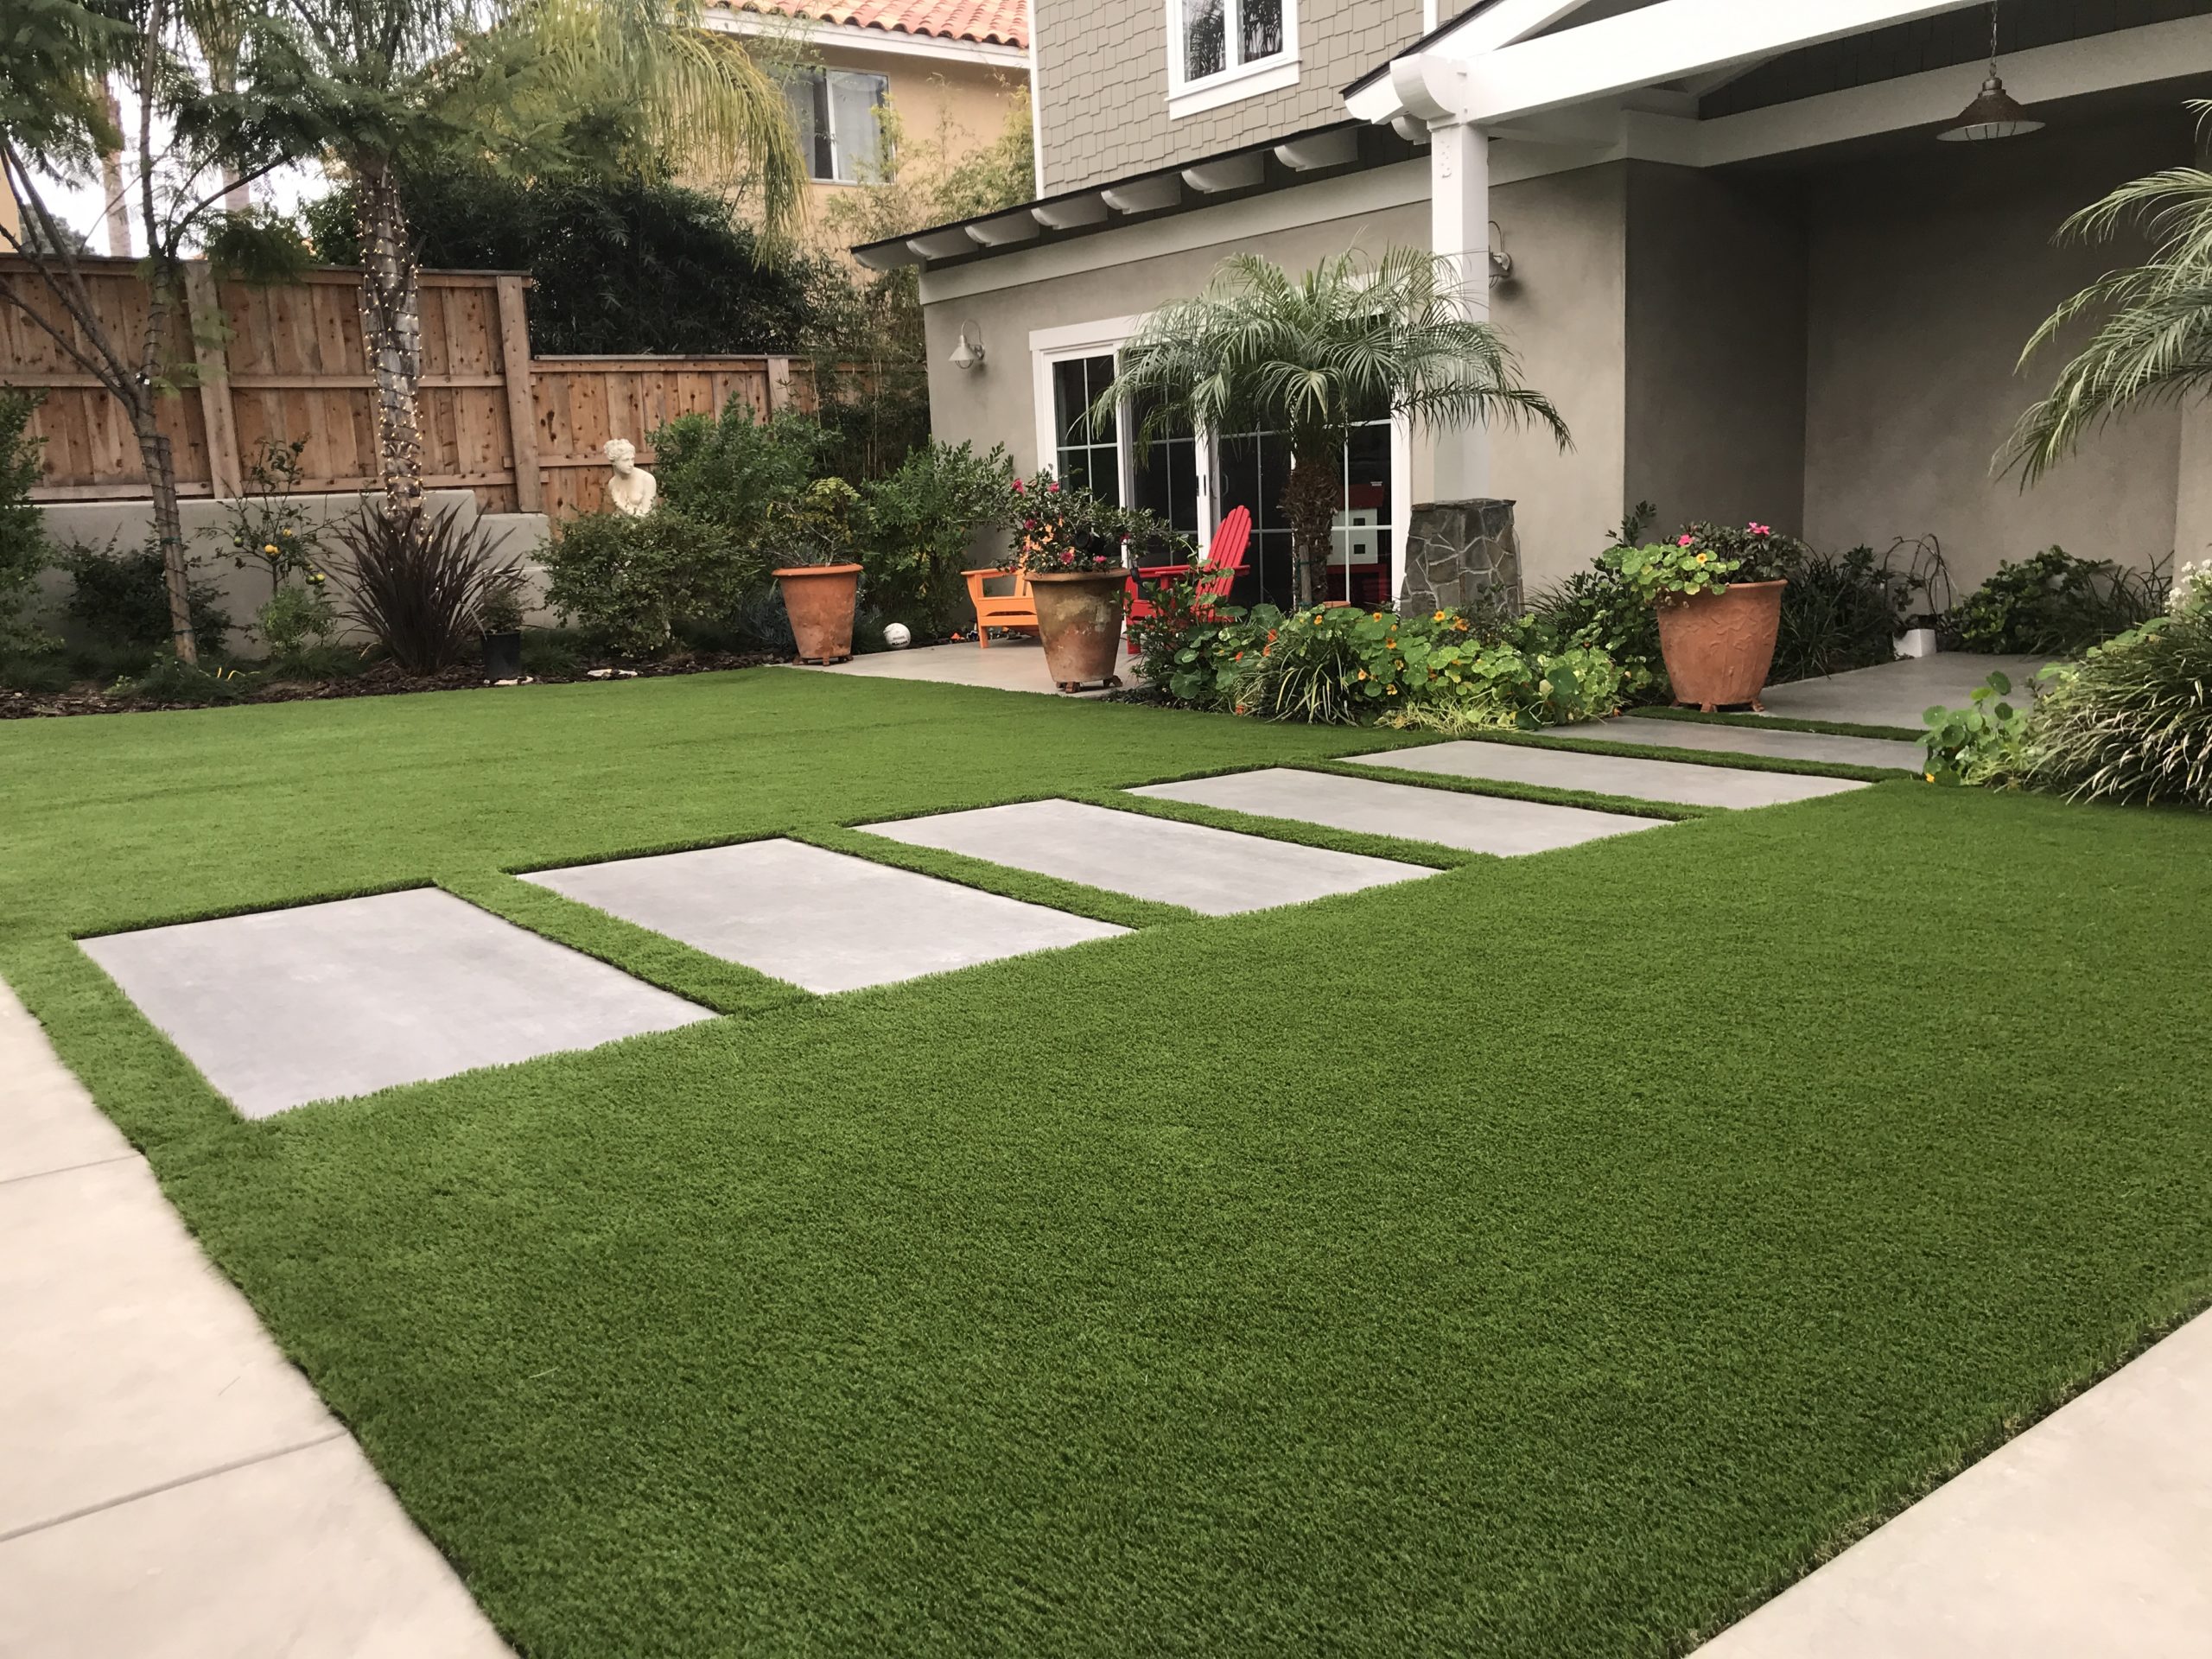 Artificial Turf Pros And Cons In Avalon Why You Should Consider Artificial Lawns For Your Home 